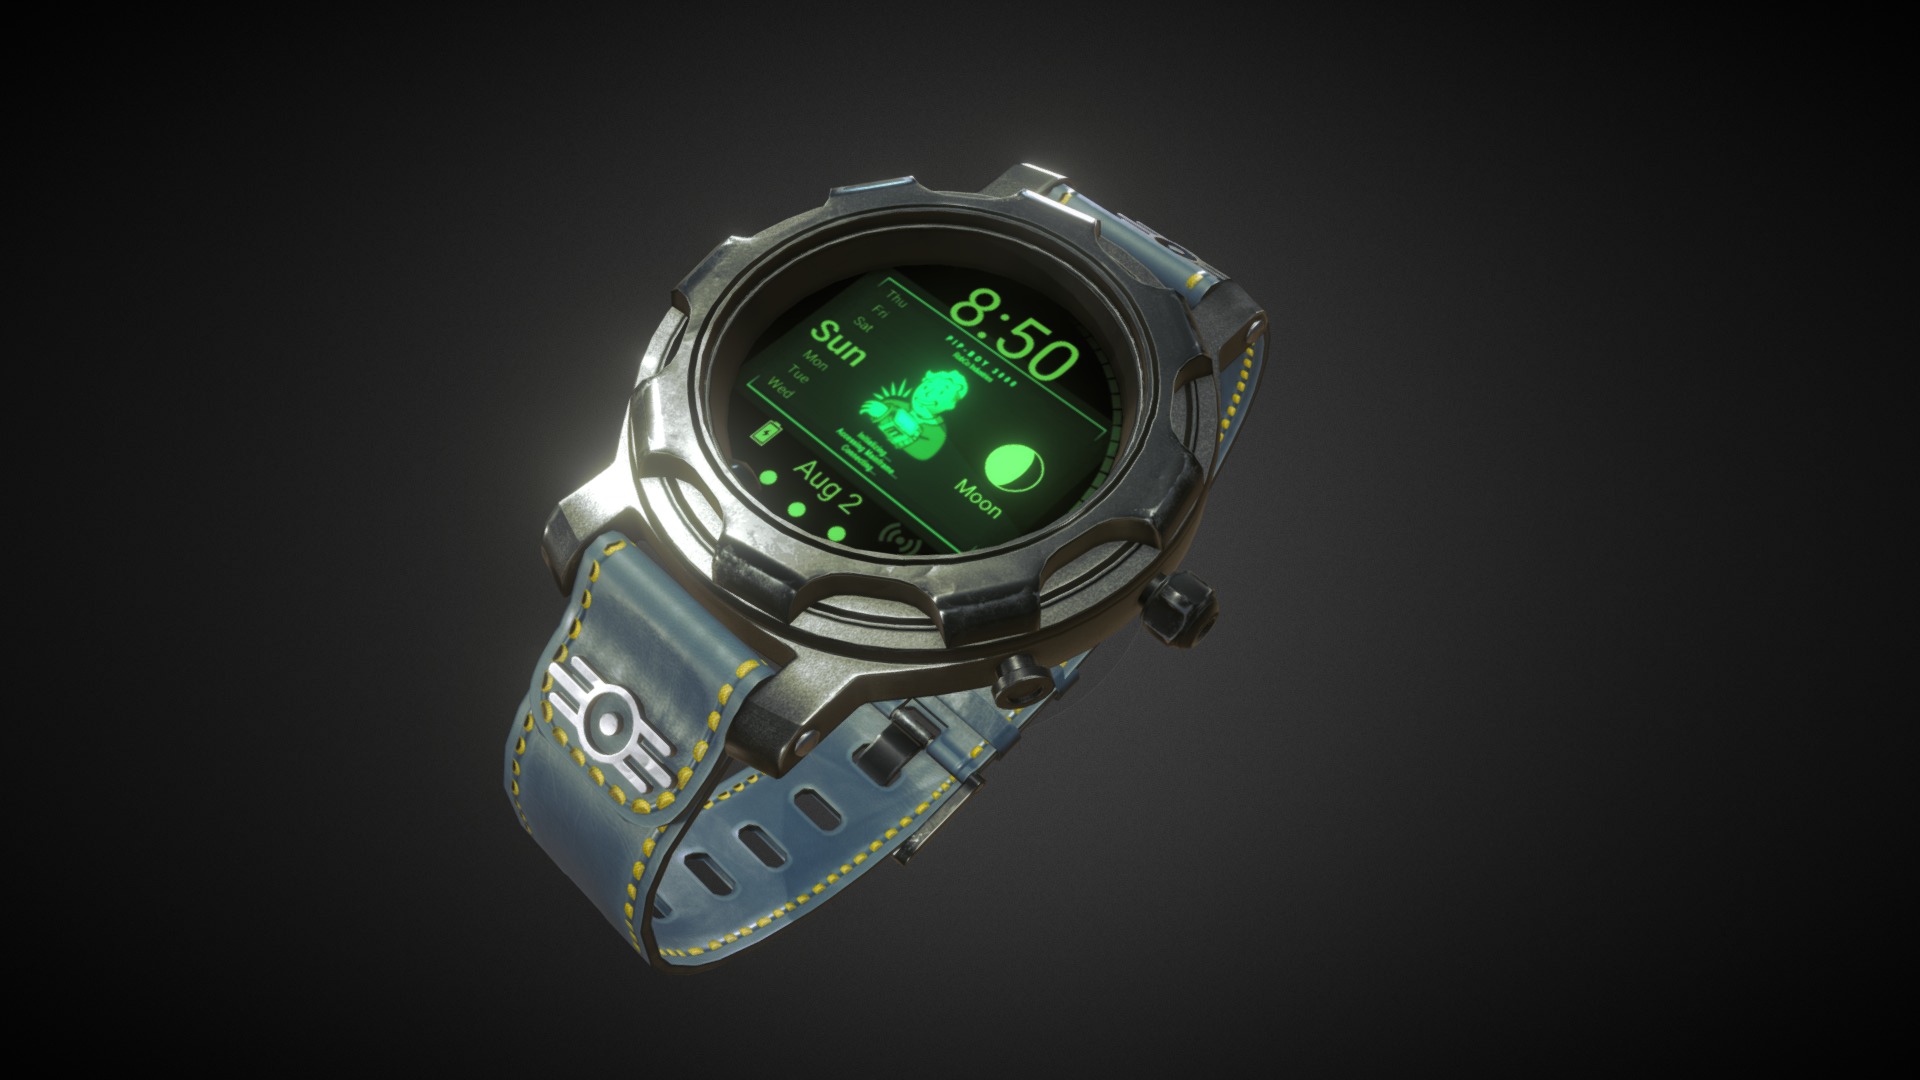 3D model Vault 111 Watch: Fallout - This is a 3D model of the Vault 111 Watch: Fallout. The 3D model is about a watch with a digital display.